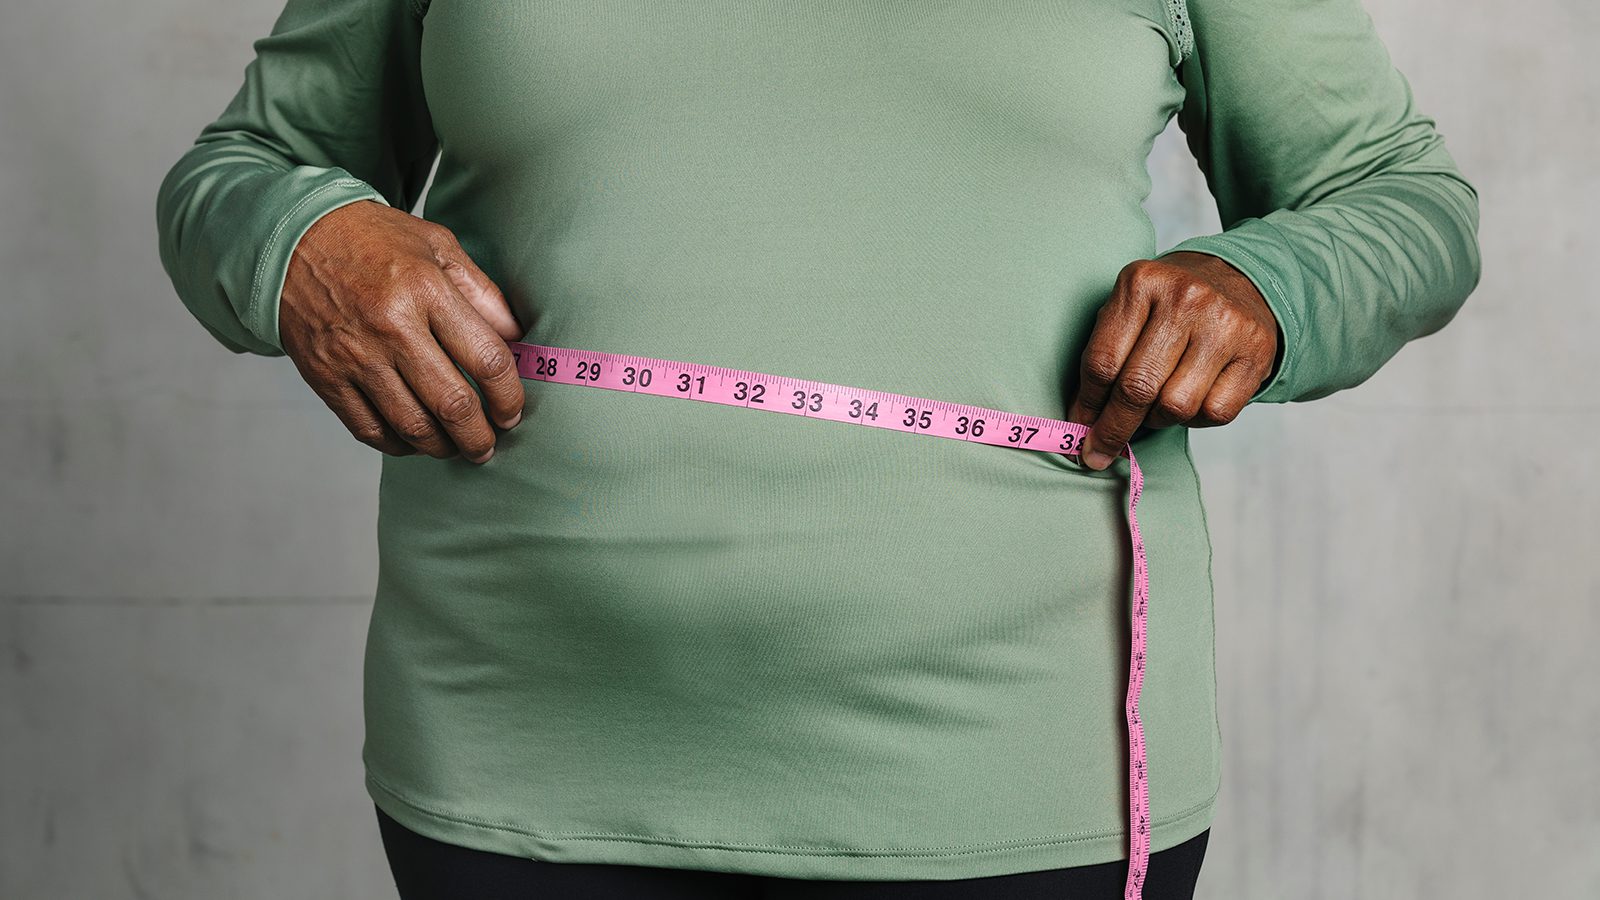 4 Causes of Midlife Weight Gain, According to Doctors